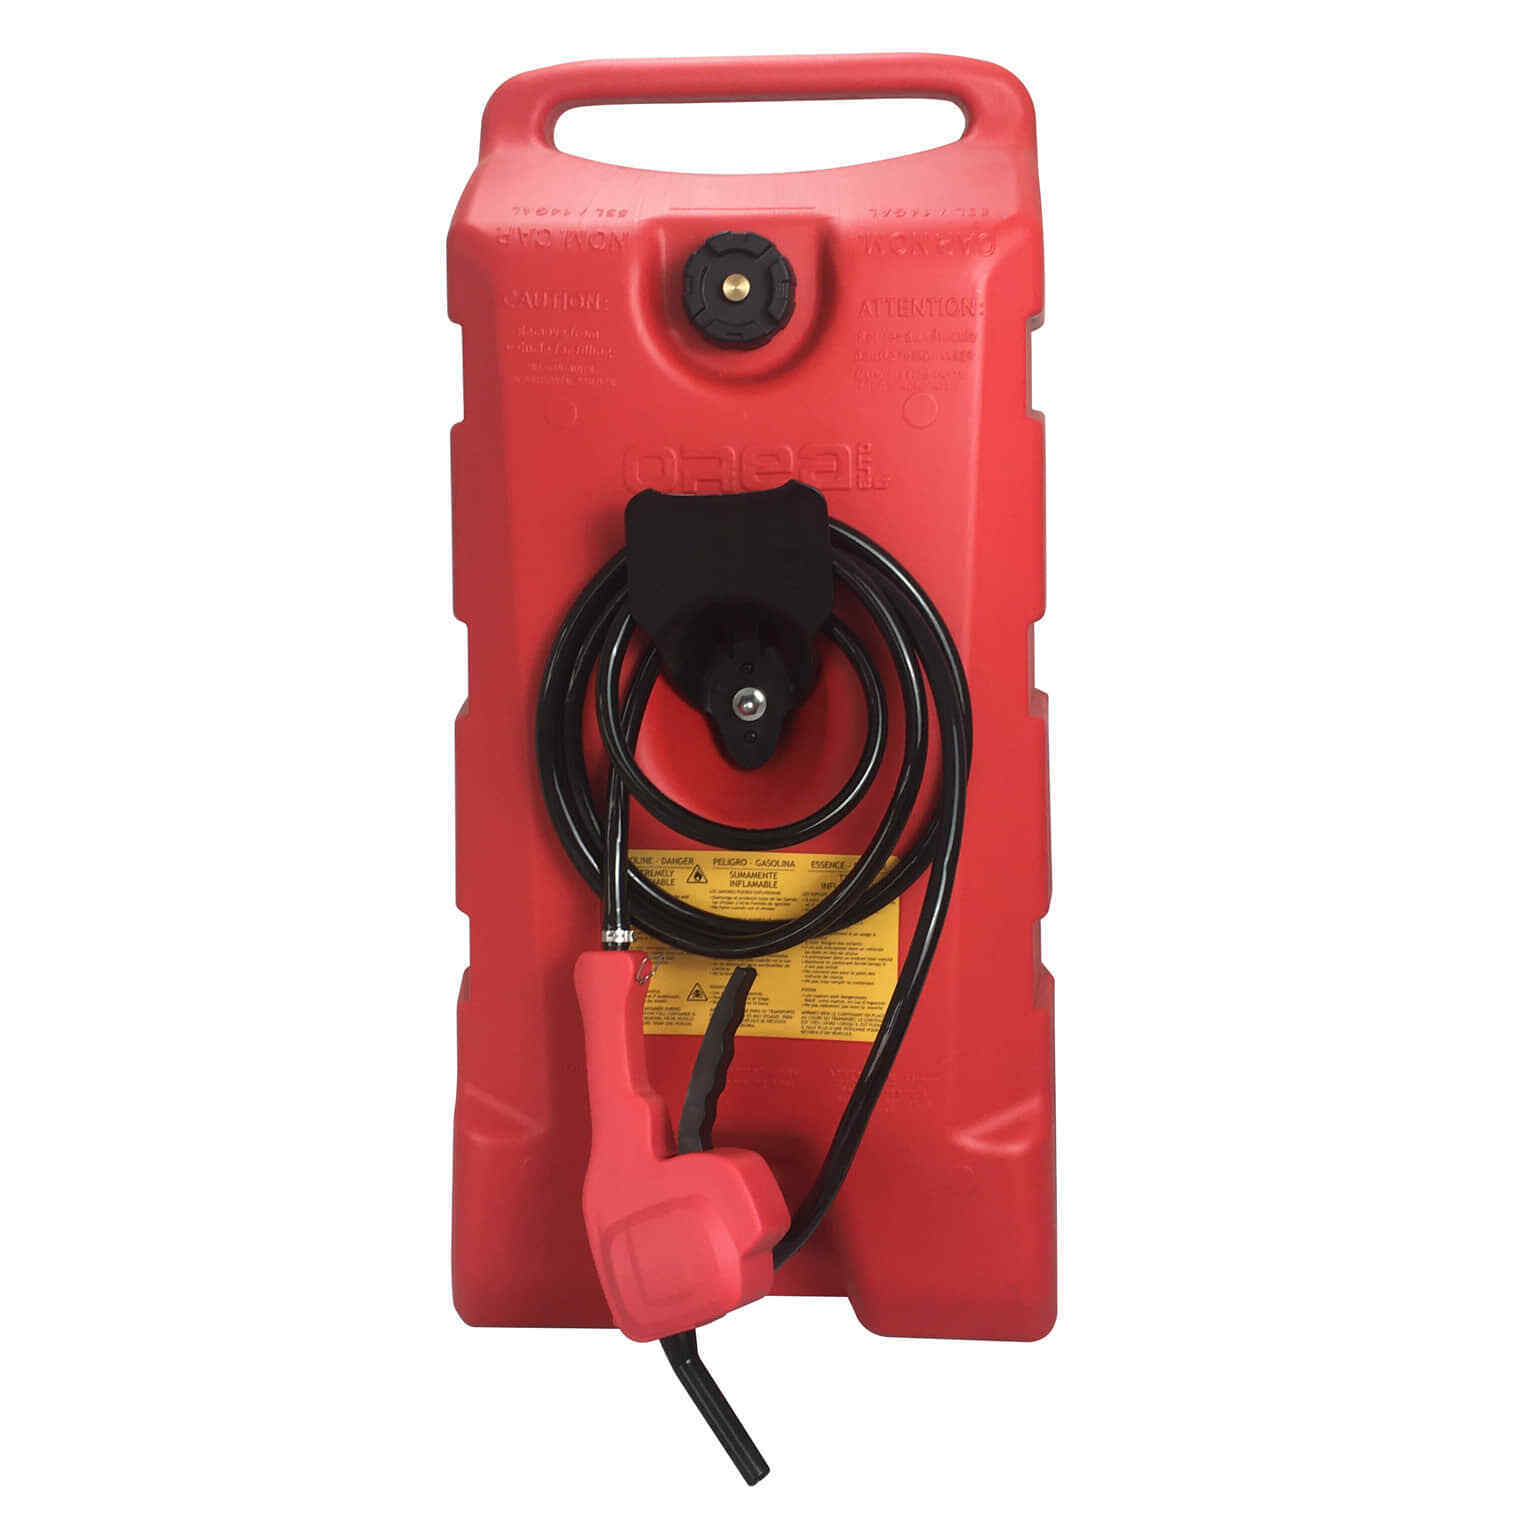 14 Gallon Fuel Transfer Gas Caddy Tank Pump Container Portable Rolling Wheel Red